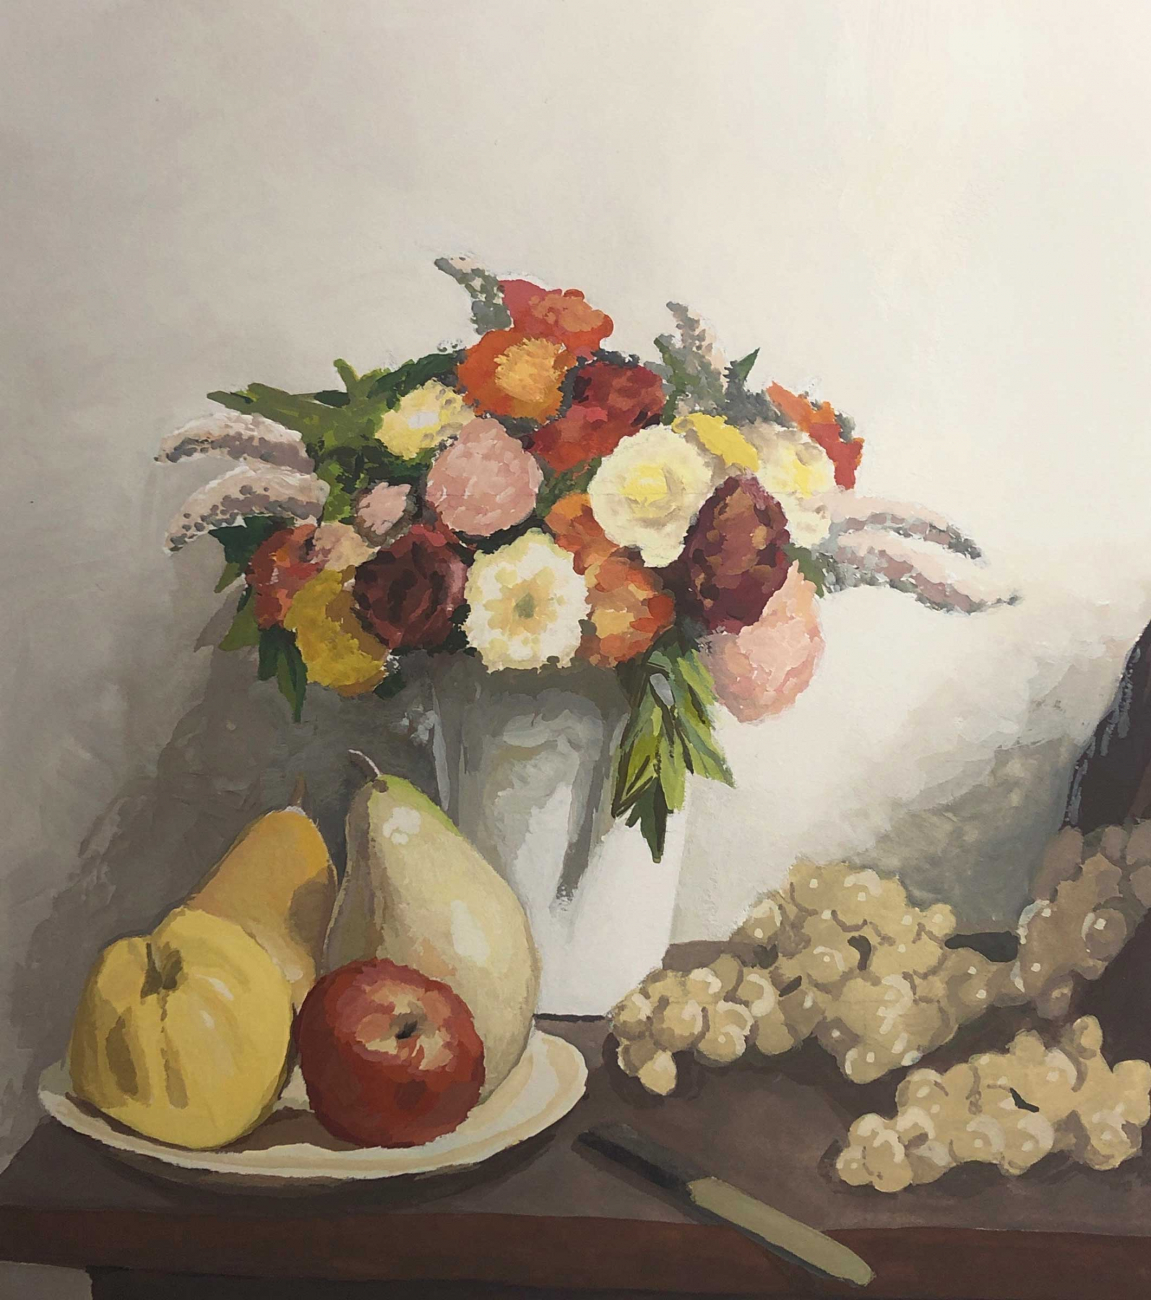 A painting of a pot of flowers and a plate of fruit.